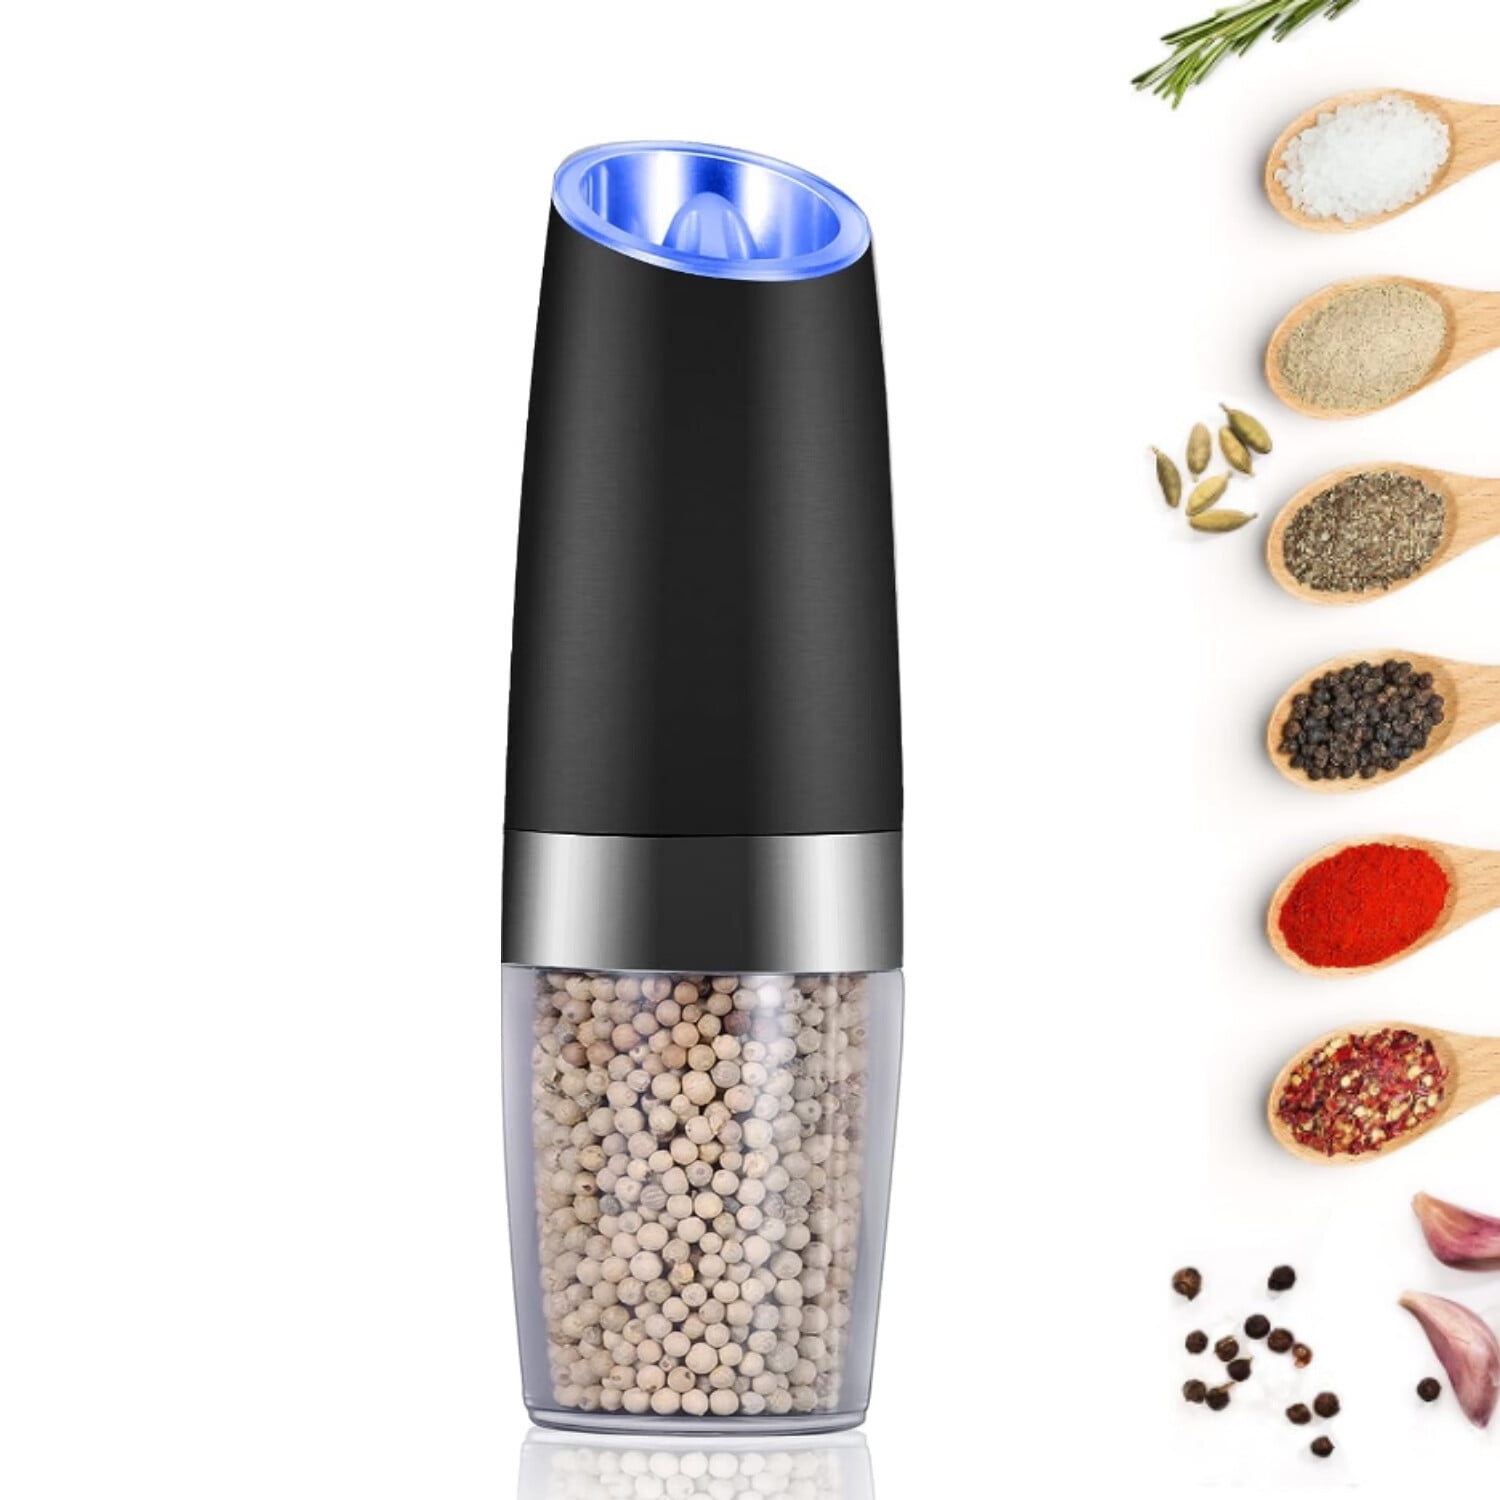 Gravity Electric Salt And Pepper Grinders Set Battery Operated Stainless  Steel Automatic Pepper Mills With Blue Led Light T2003270v From Leanne99,  $32.24